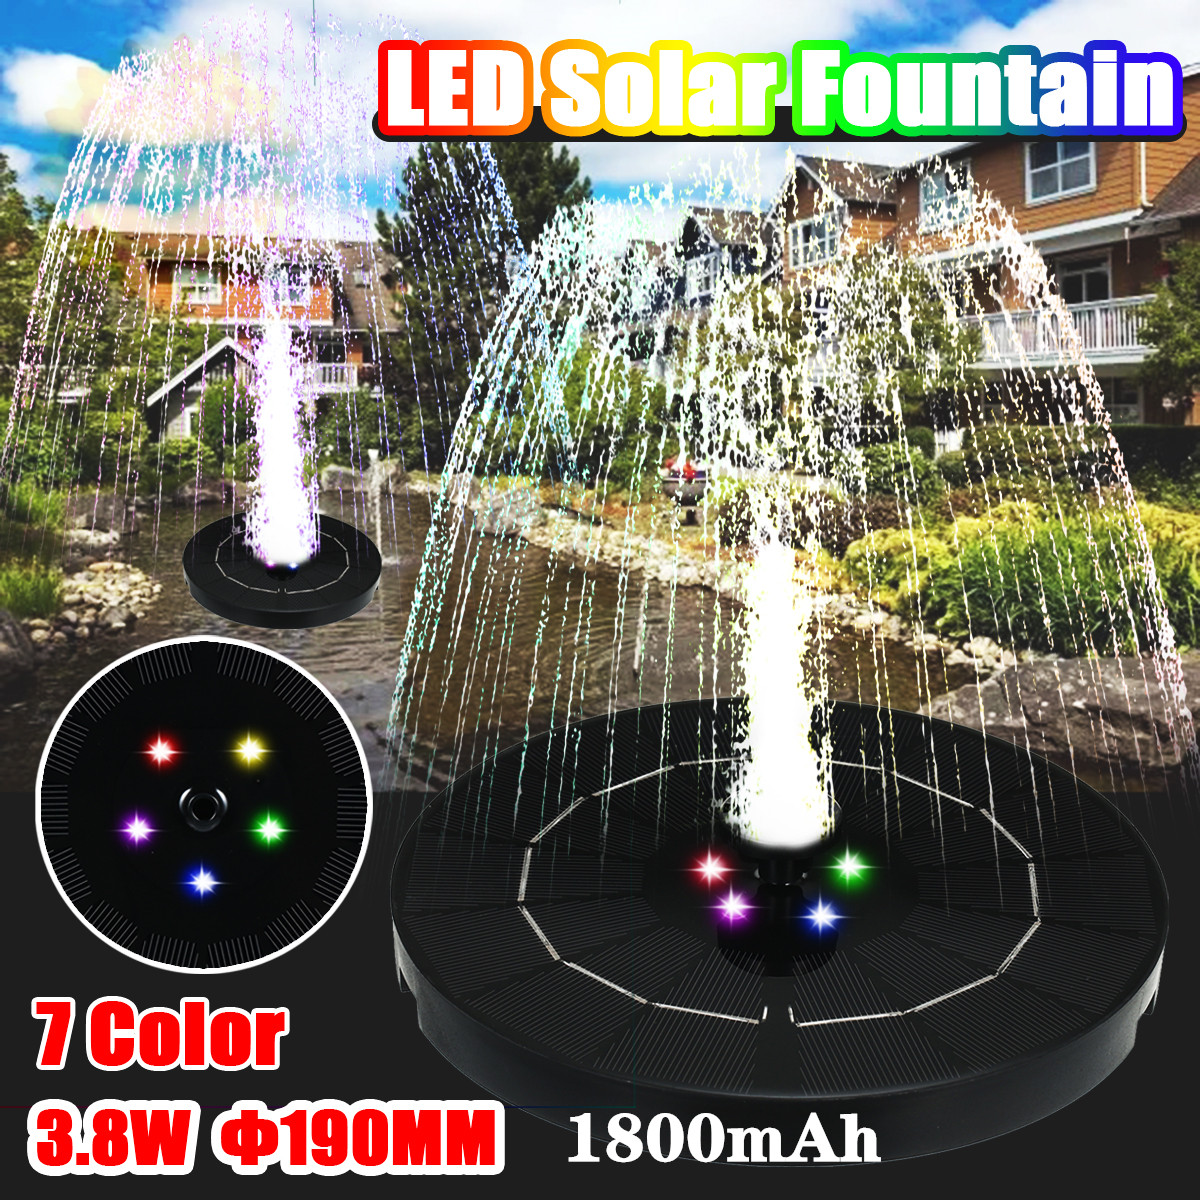 RGB-LED-Solar-Powered-Fountain-Pump-W-6-Nozzles-Water-Pump-Night-Floating-Garden-1879317-3